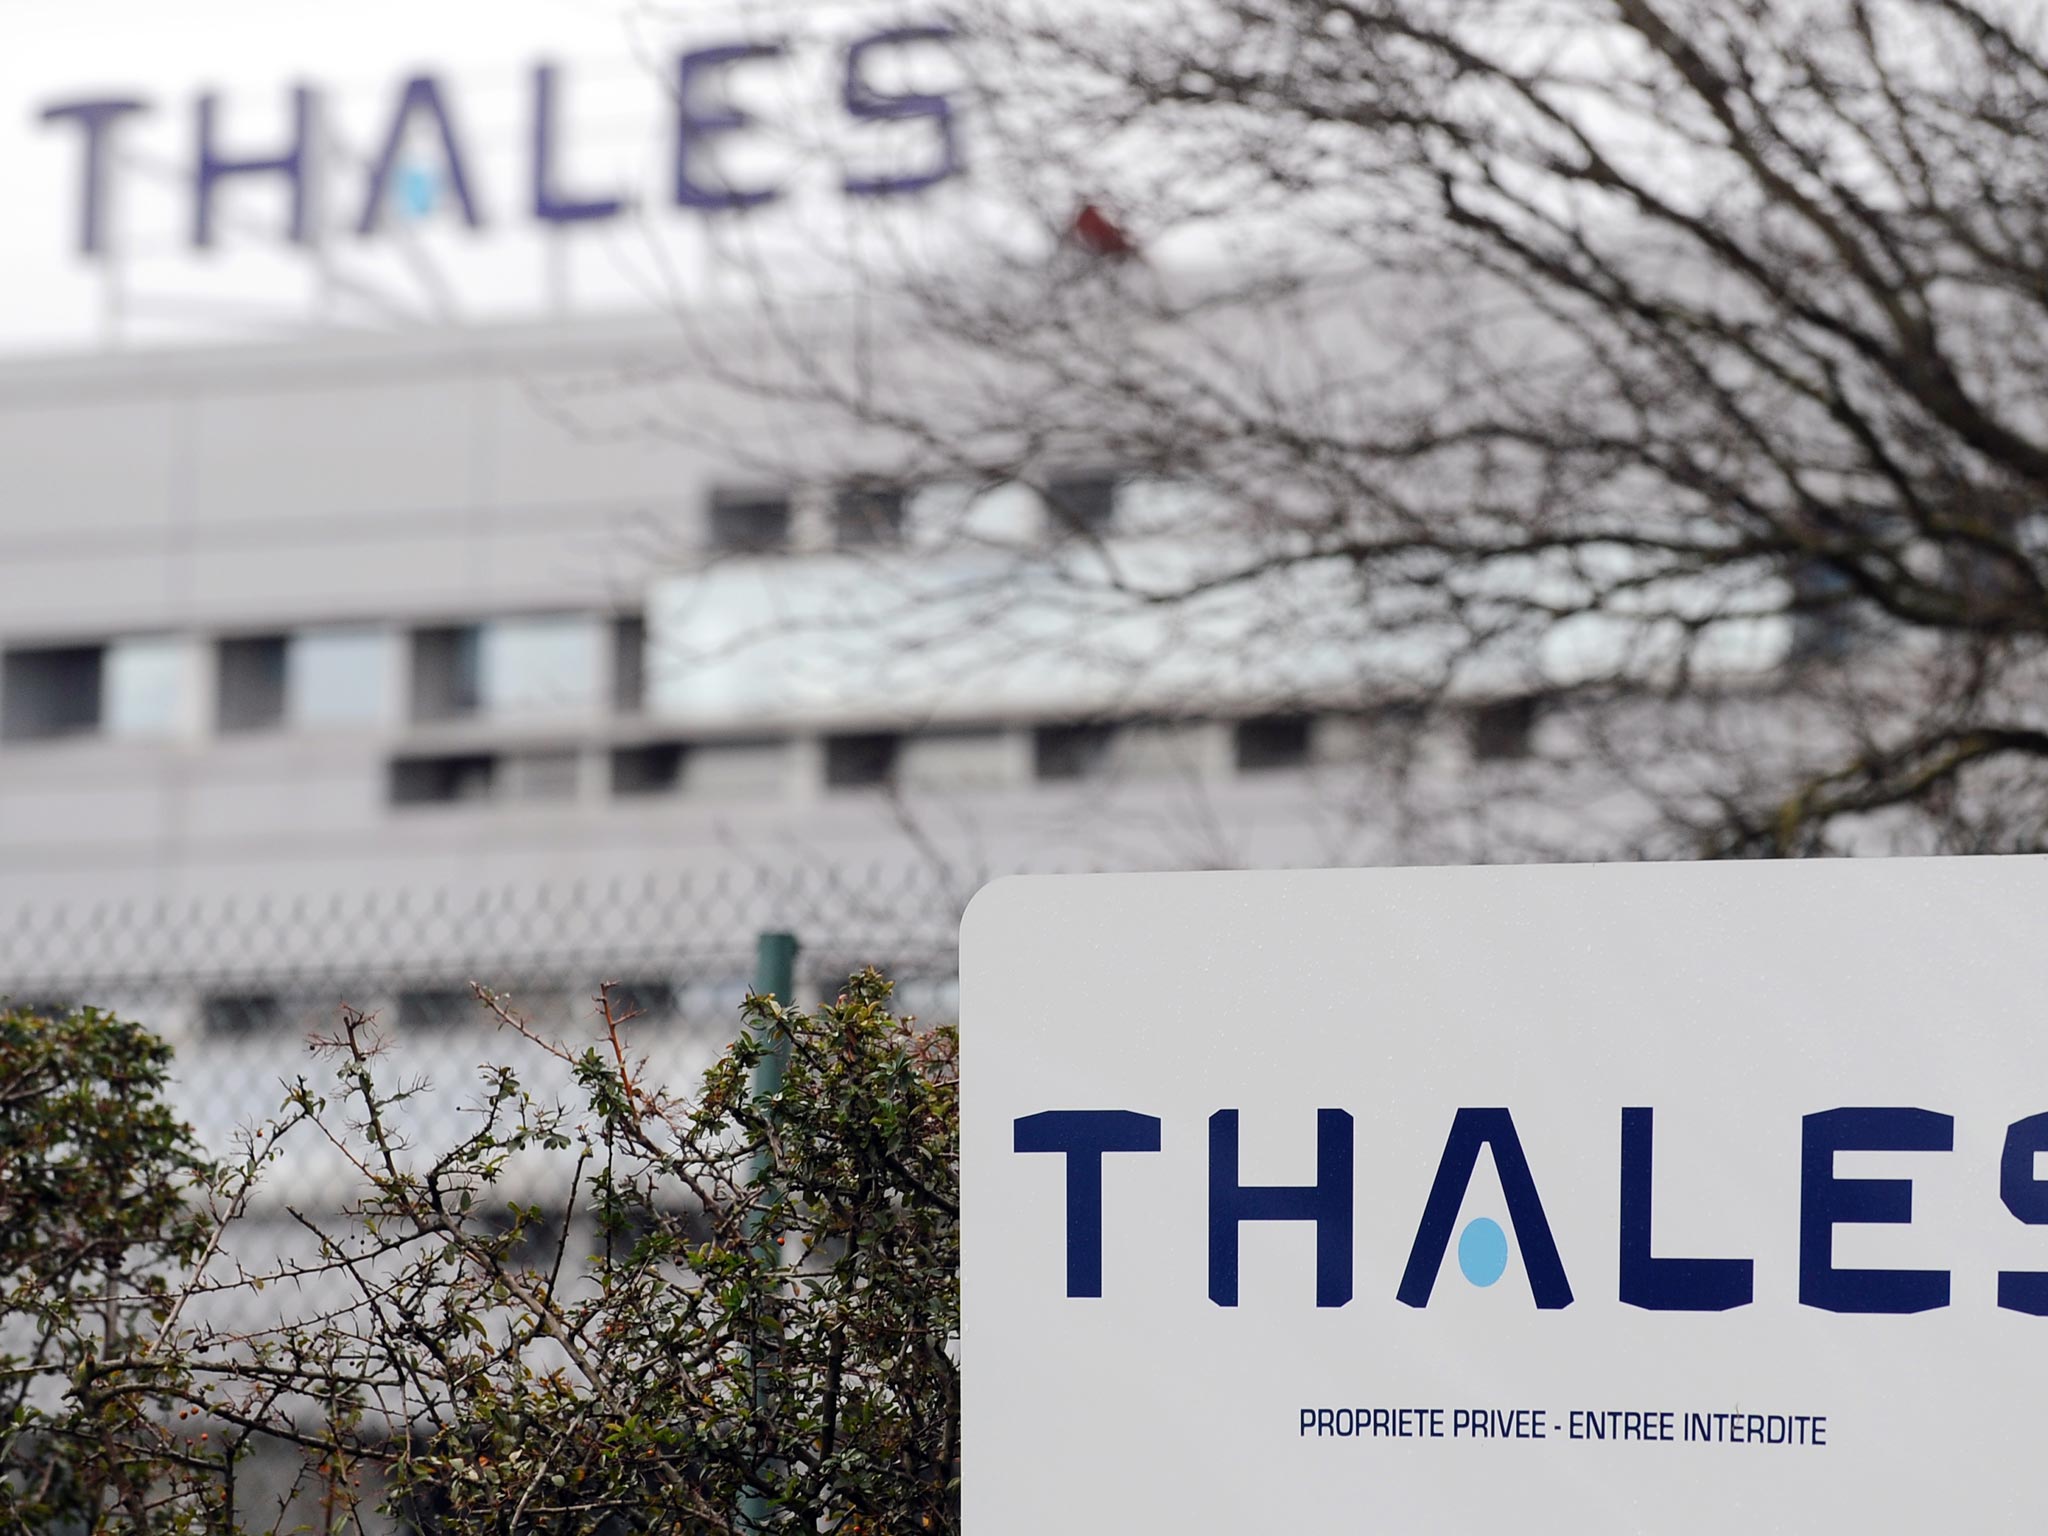 The Campaign Against the Arms Trade staged action to highlight what it claims is an inappropriate commercial relationship with Thales